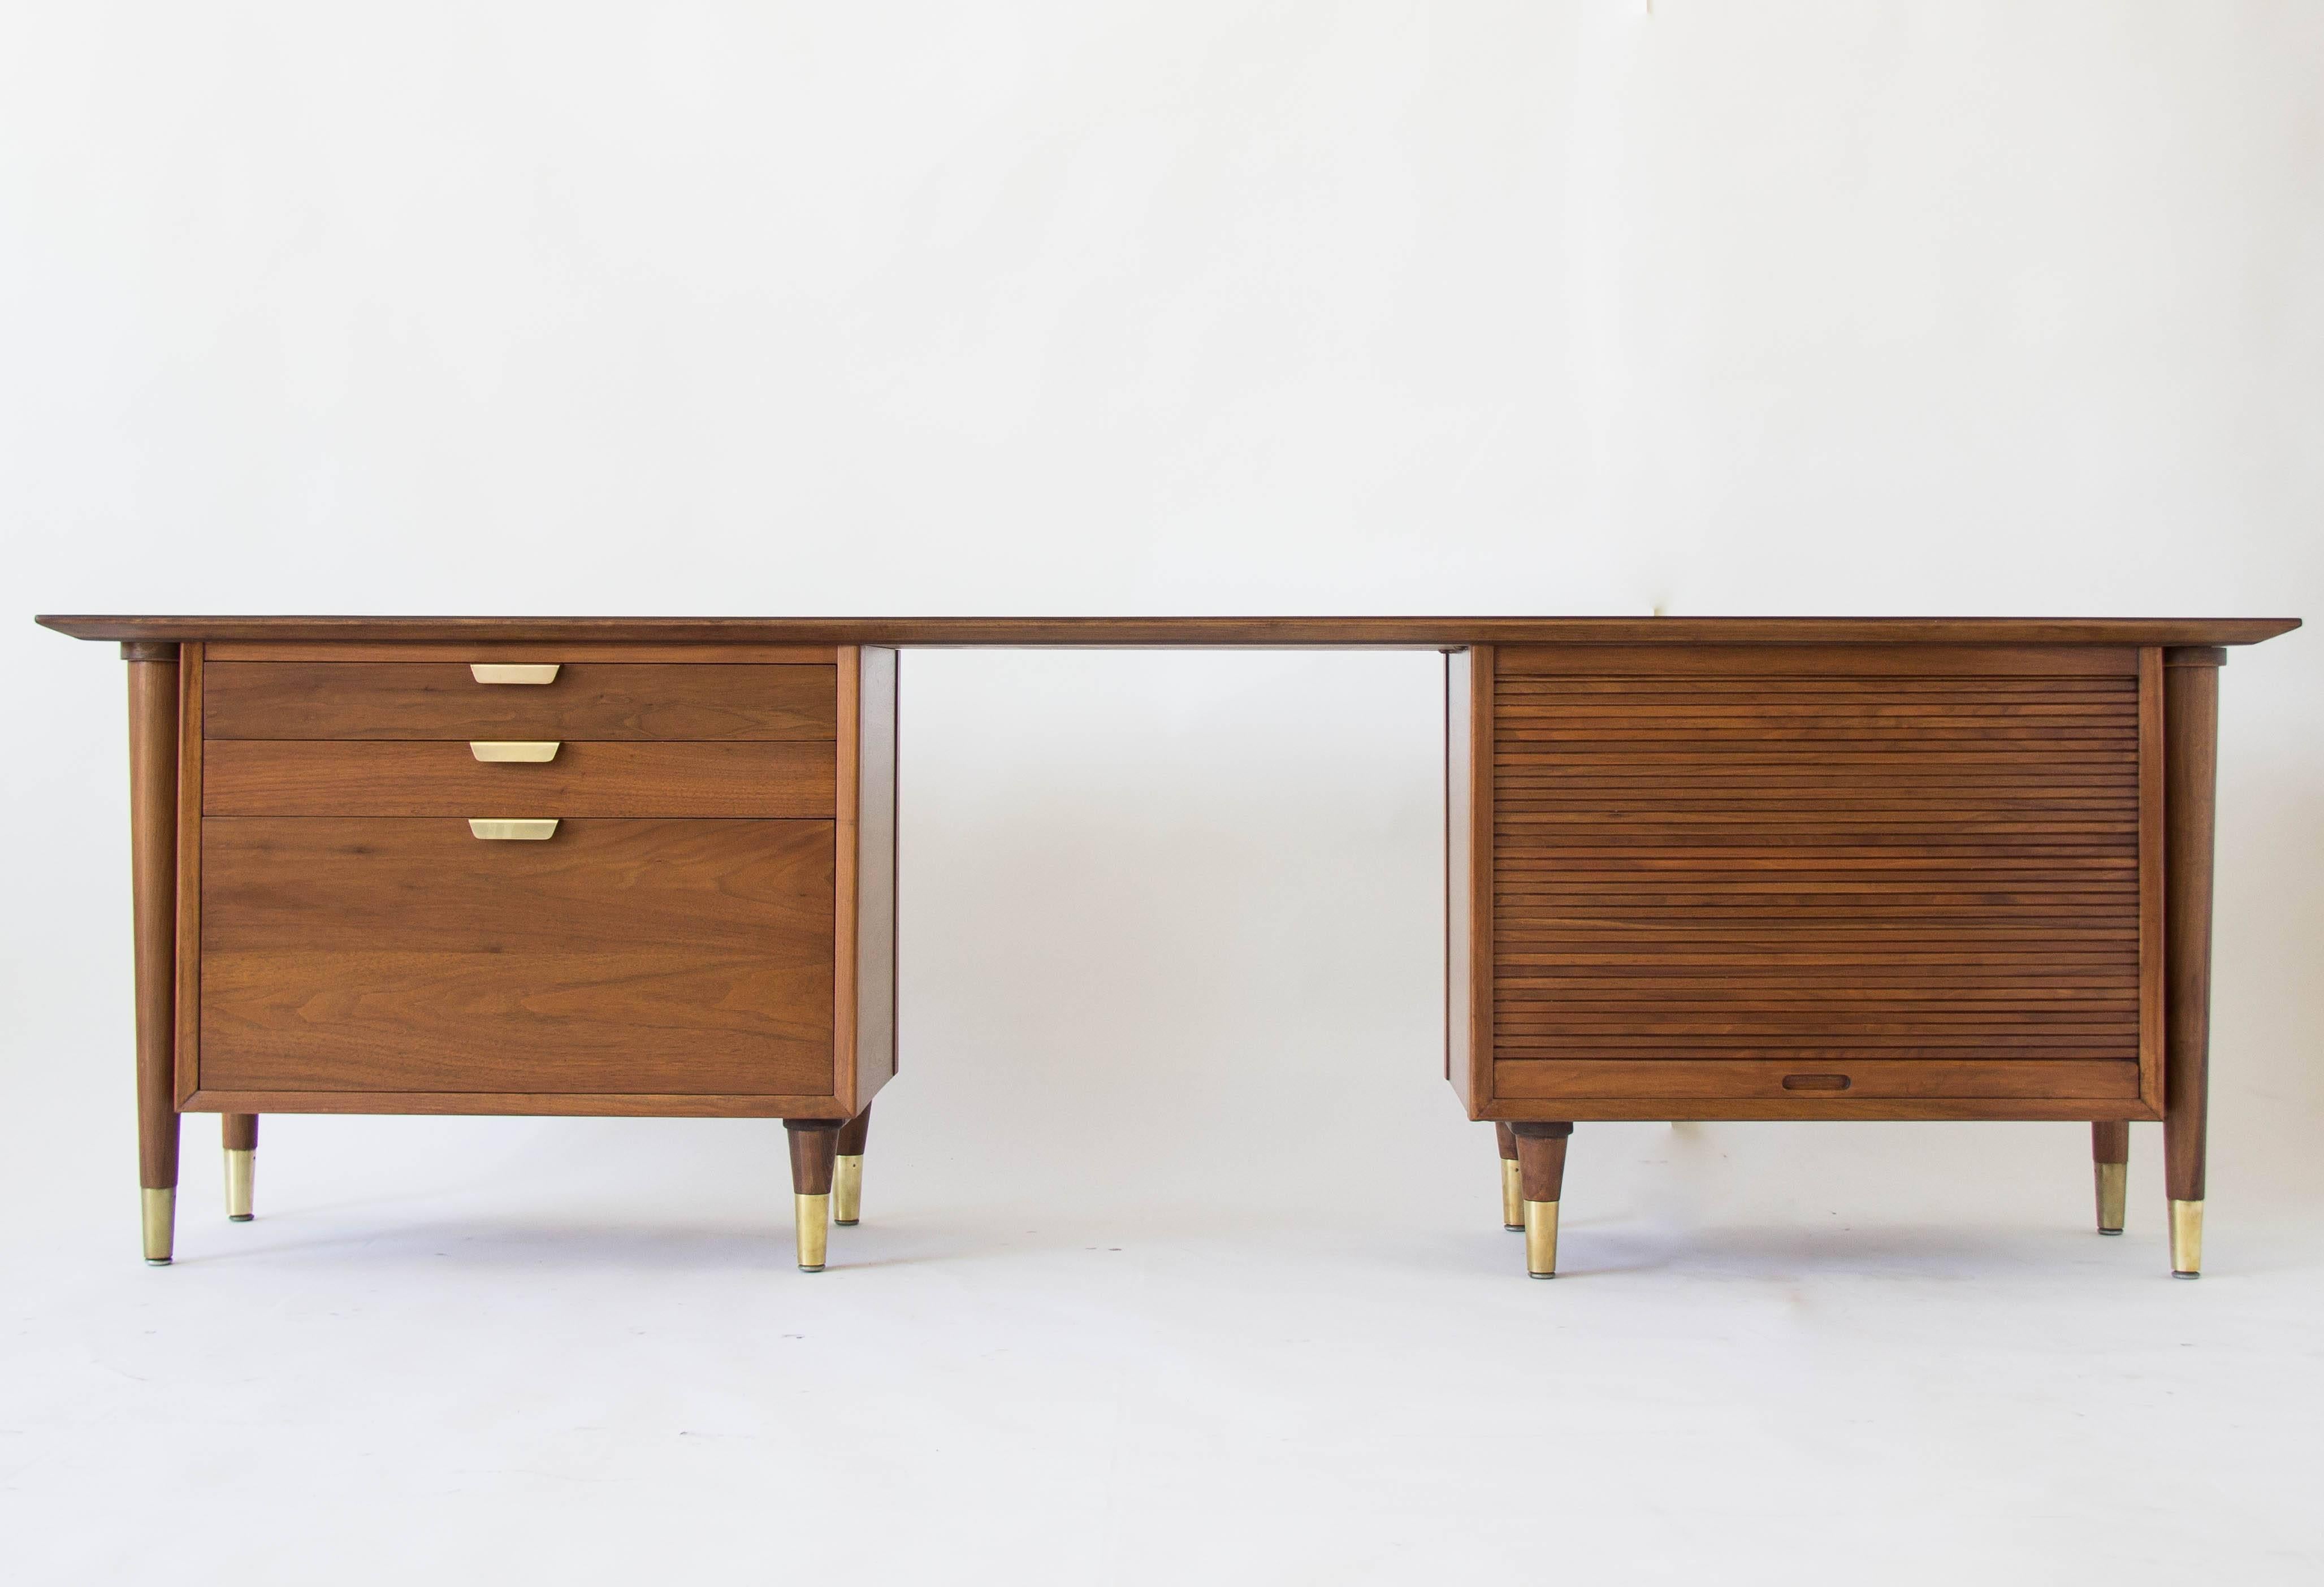 Distinctively long and narrow design by William H. Sullivan for Standard Furniture Co. This American made walnut credenza has a slender tabletop supported by two storage stacks. The right side has a tambour door that opens onto interior storage